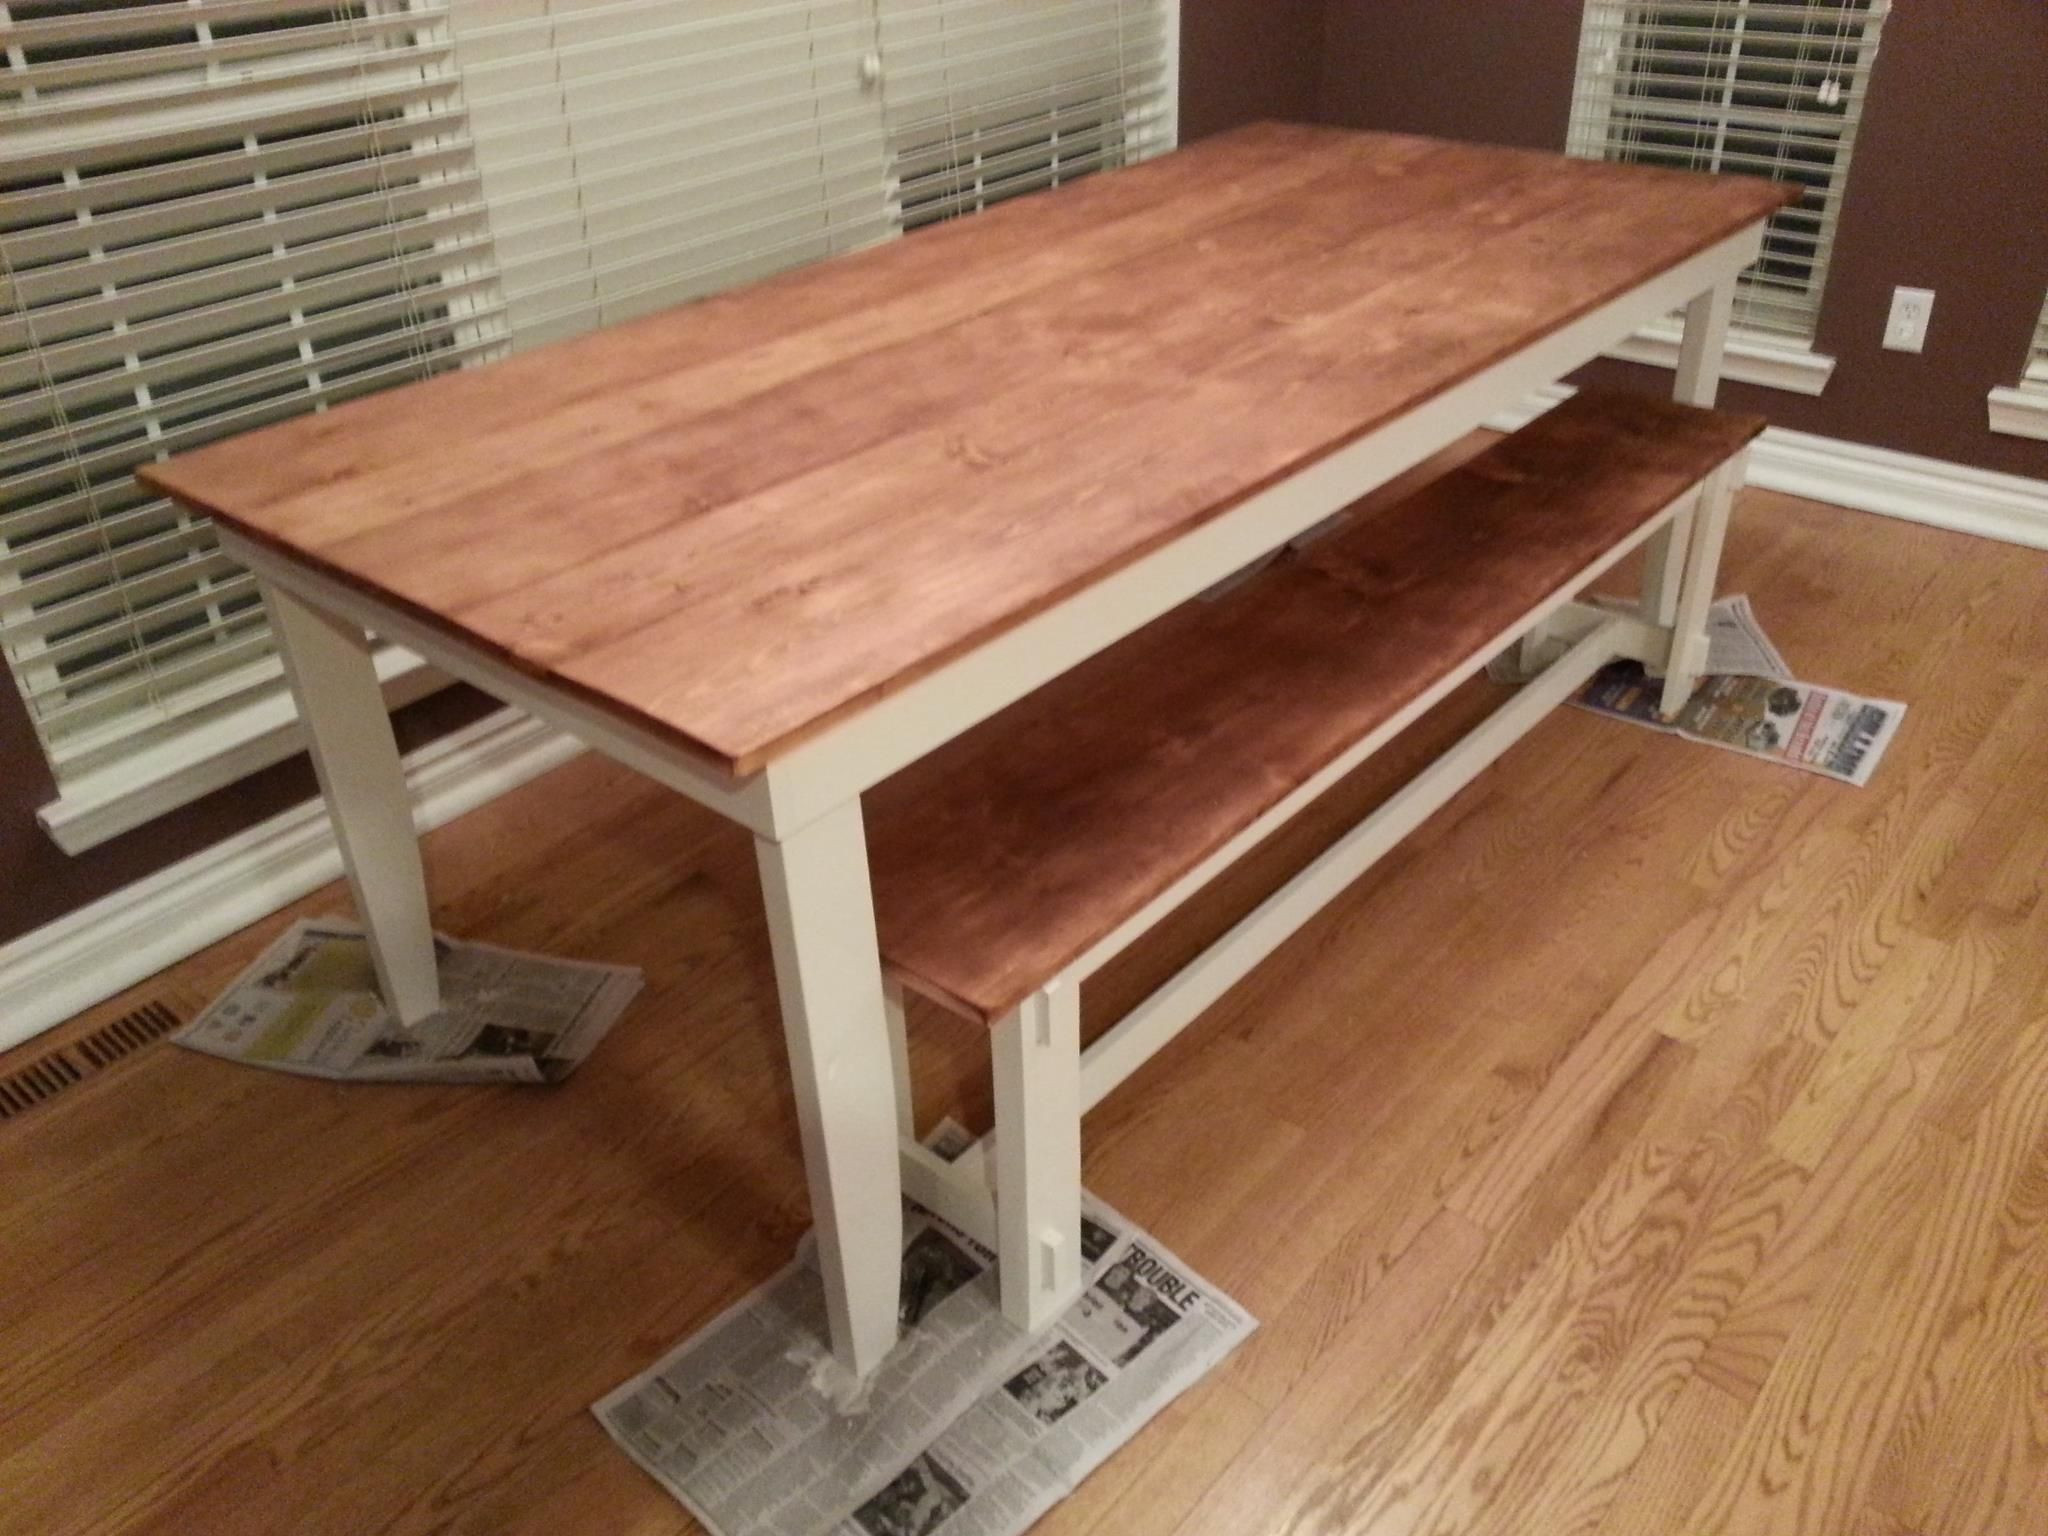 Rustic Kitchen Tables With Bench
 Rustic Table and Bench minwax honey stain